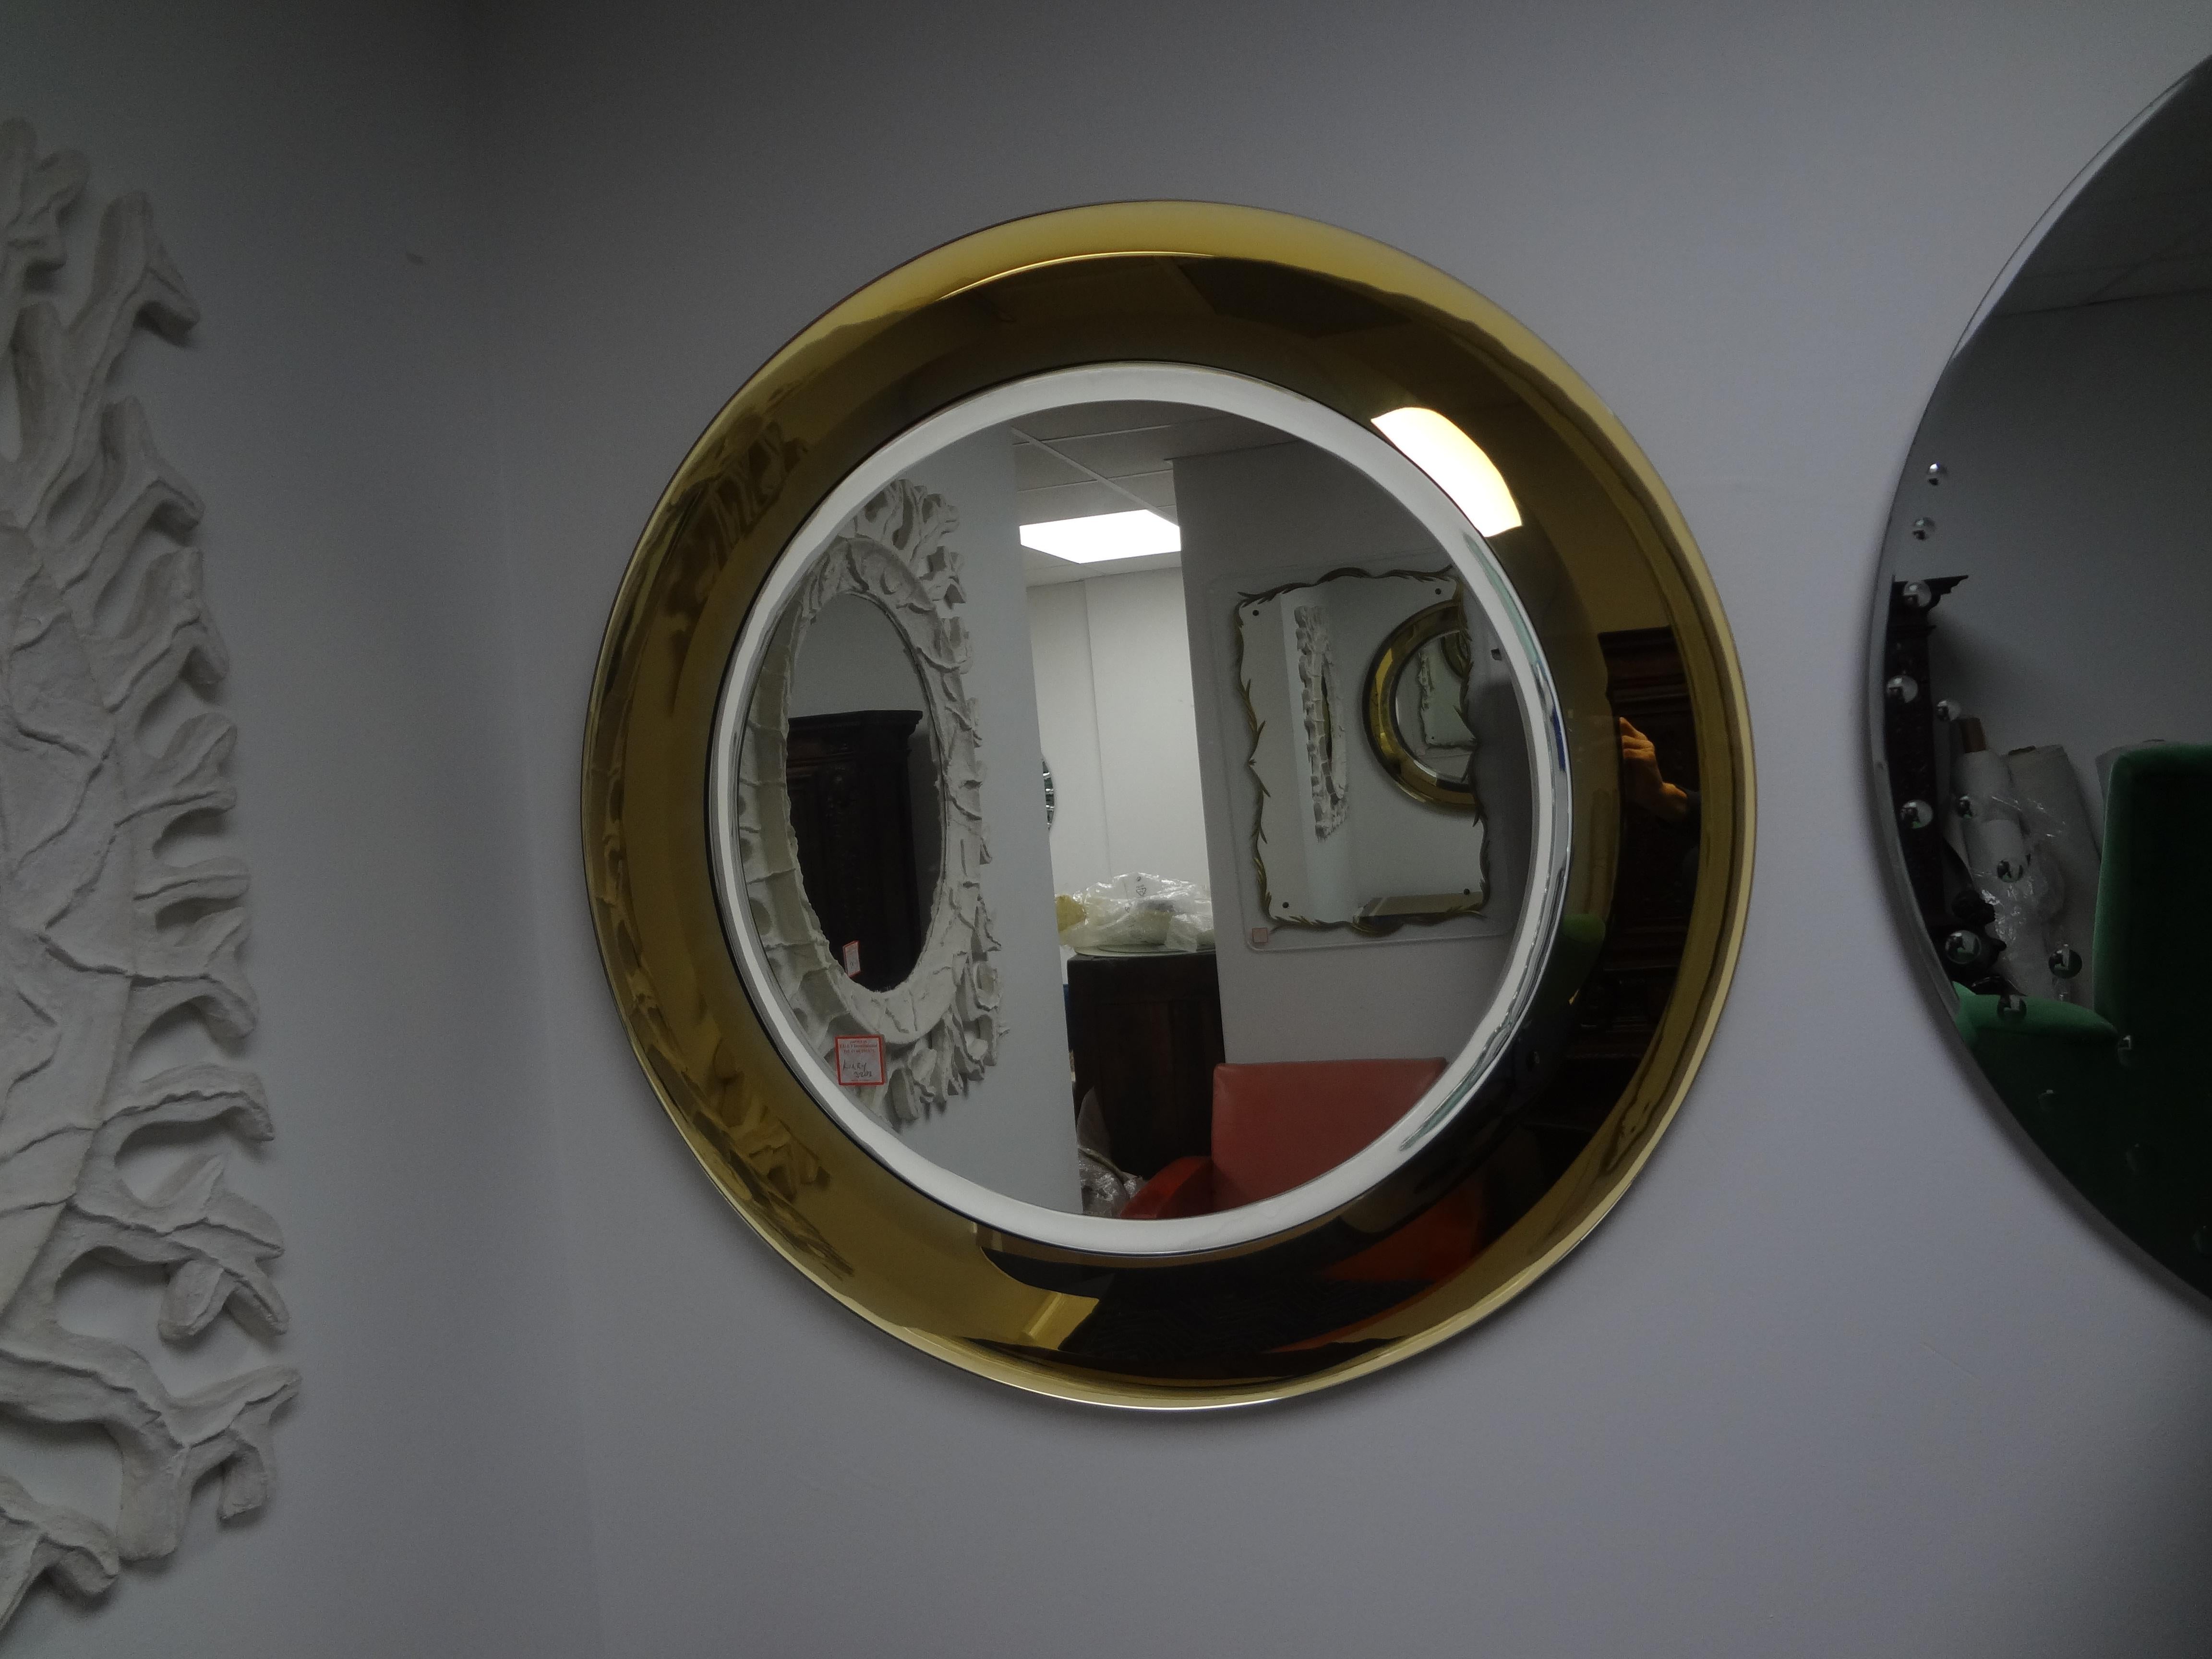 Pair Of Italian Max Ingrand For Fontana Arte Attributed Beveled Mirrors.
Hard to find pair of gold Italian Fontana Arte attributed mirrors with three exterior gold beveled bands surrounding a beveled silver central mirror.
These outstanding Italian